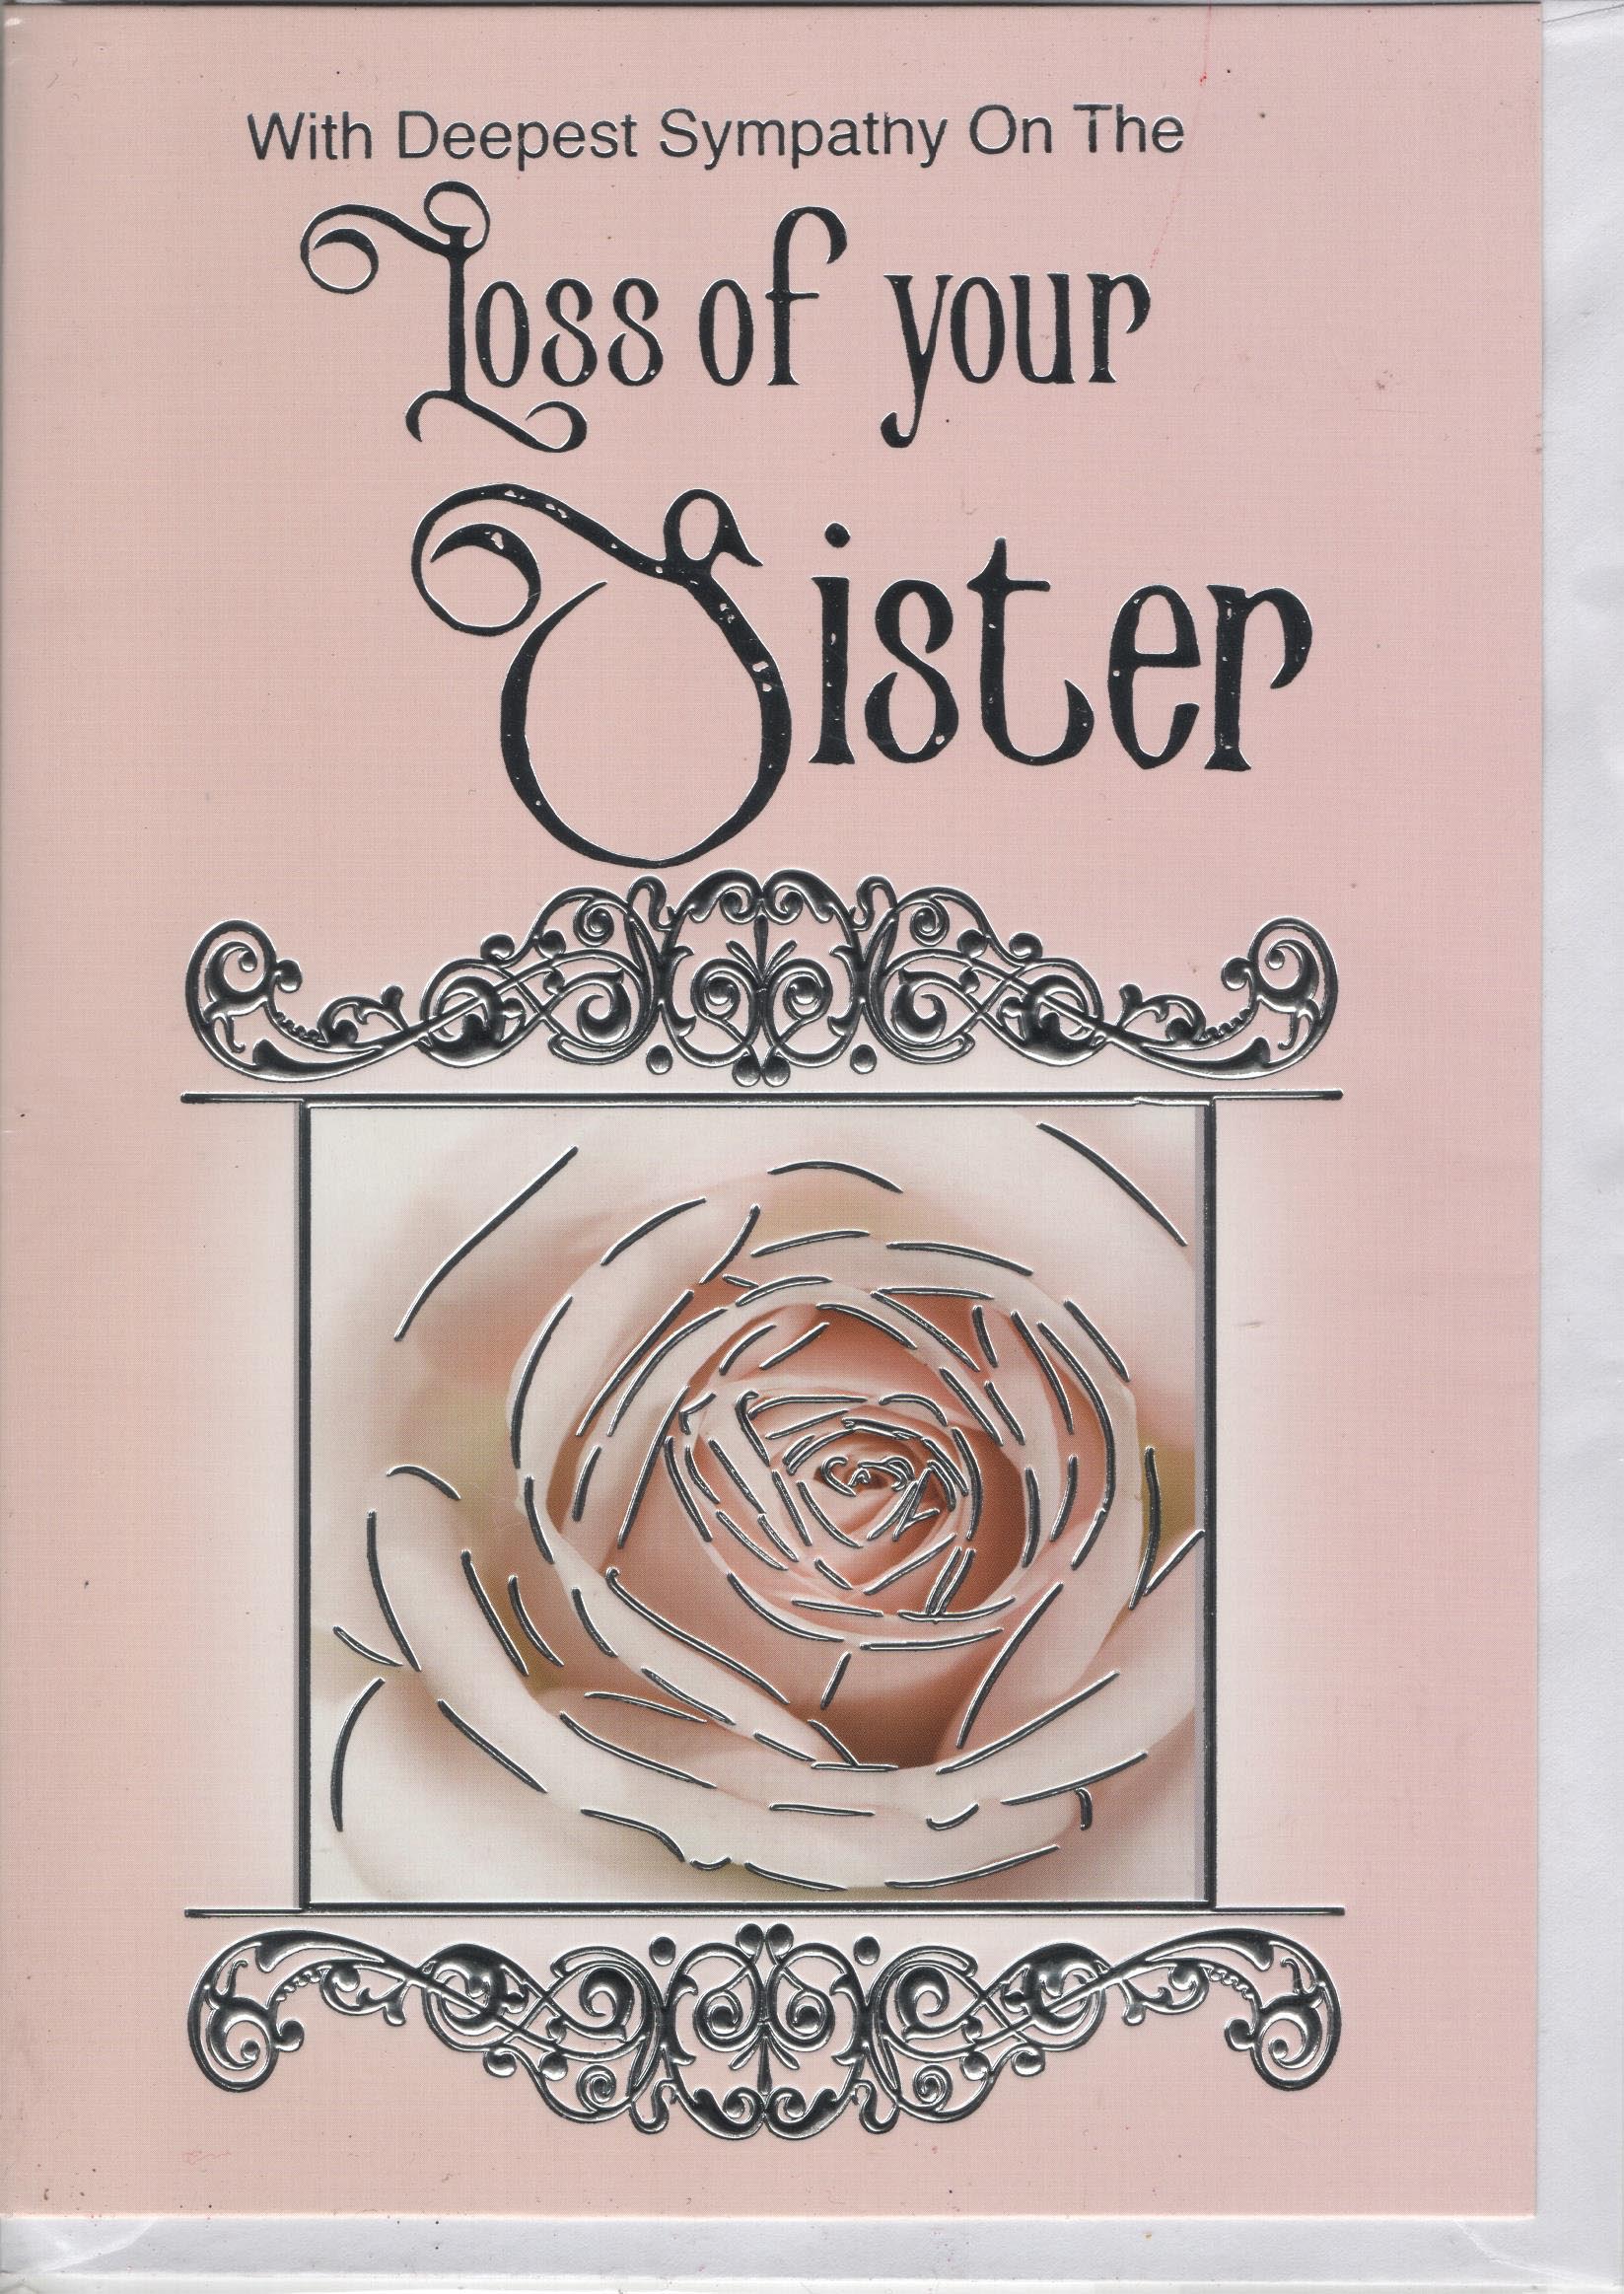 With Deepest Sympathy on The Loss of Your Sister